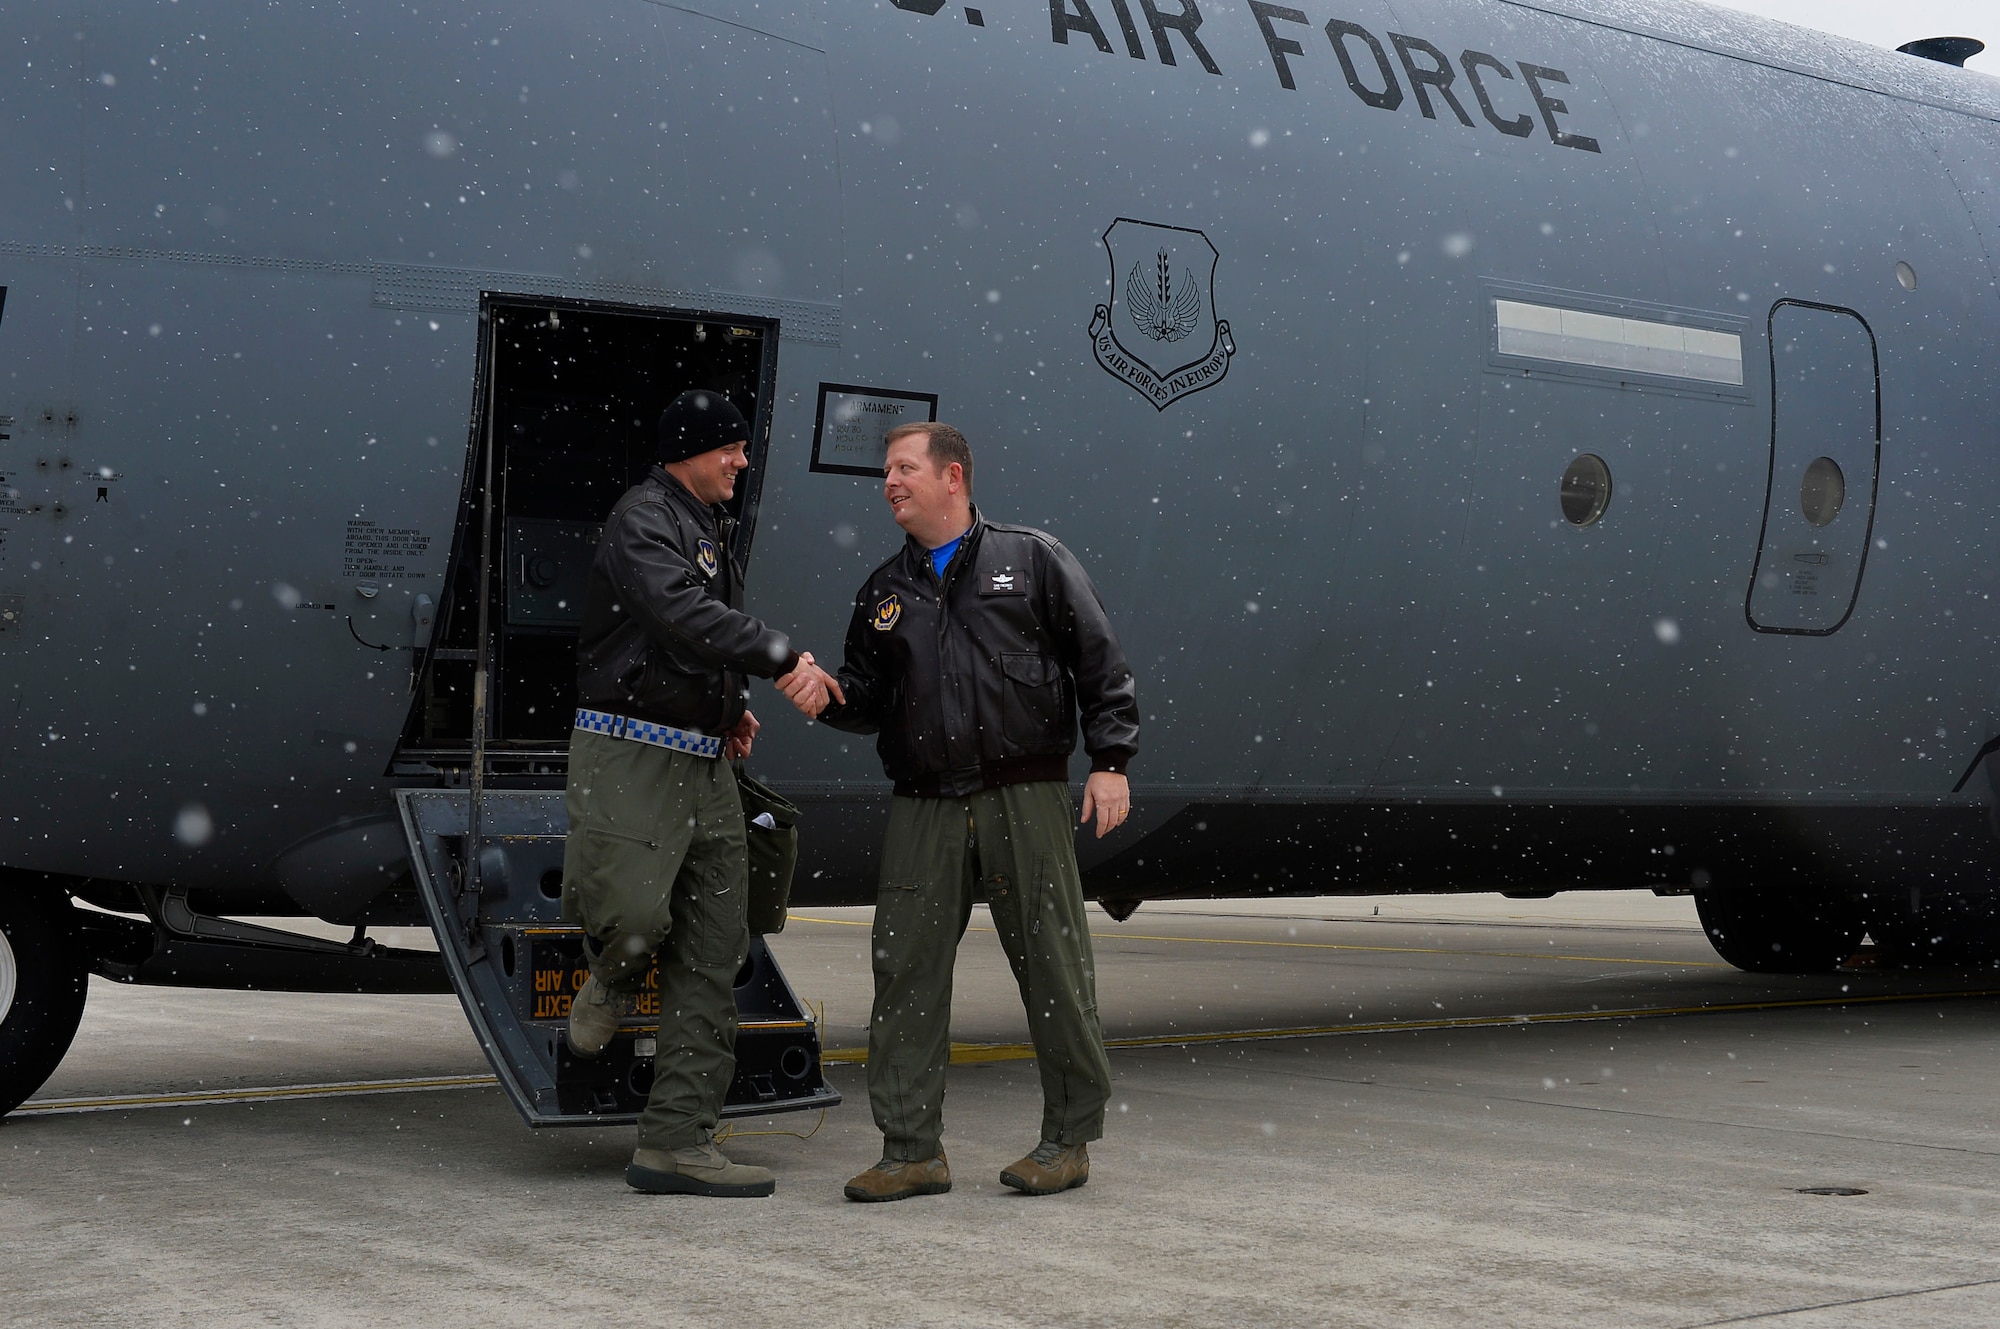 Lt. Col. Barry A. King. II, 37th Airlift Squadron commander, left, shakes hands with Chief Master Sgt. Samuel Frederick, 37th AS superintendent, as he disembarks a C-130J Super Hercules on Ramstein Air Base, Germany, Feb. 10, 2017. The 37th AS celebrated its 75th Anniversary with a training mission which culminated with a flight over the squadron building. (U.S. Air Force photo by Airman 1st Class Joshua Magbanua)